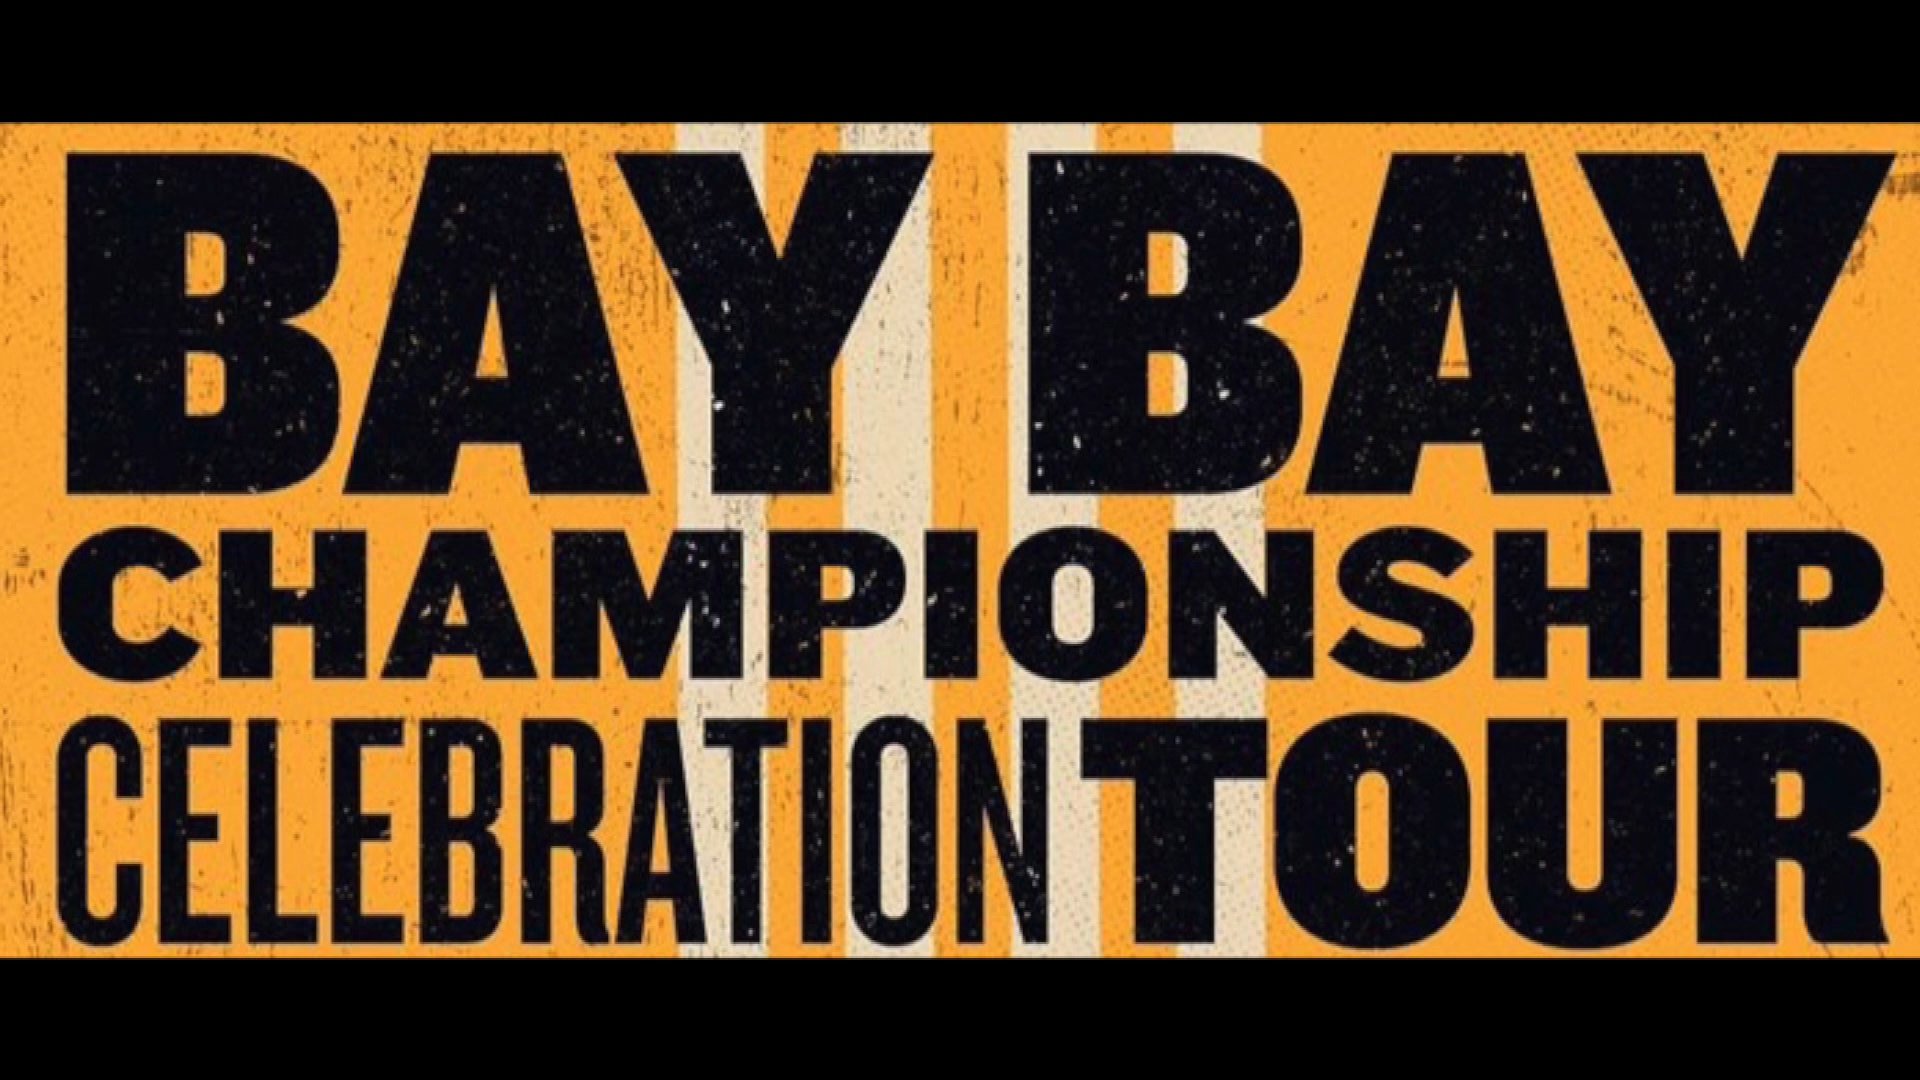 Adam Cole’s Bay Bay Championship Celebration Tour carries on